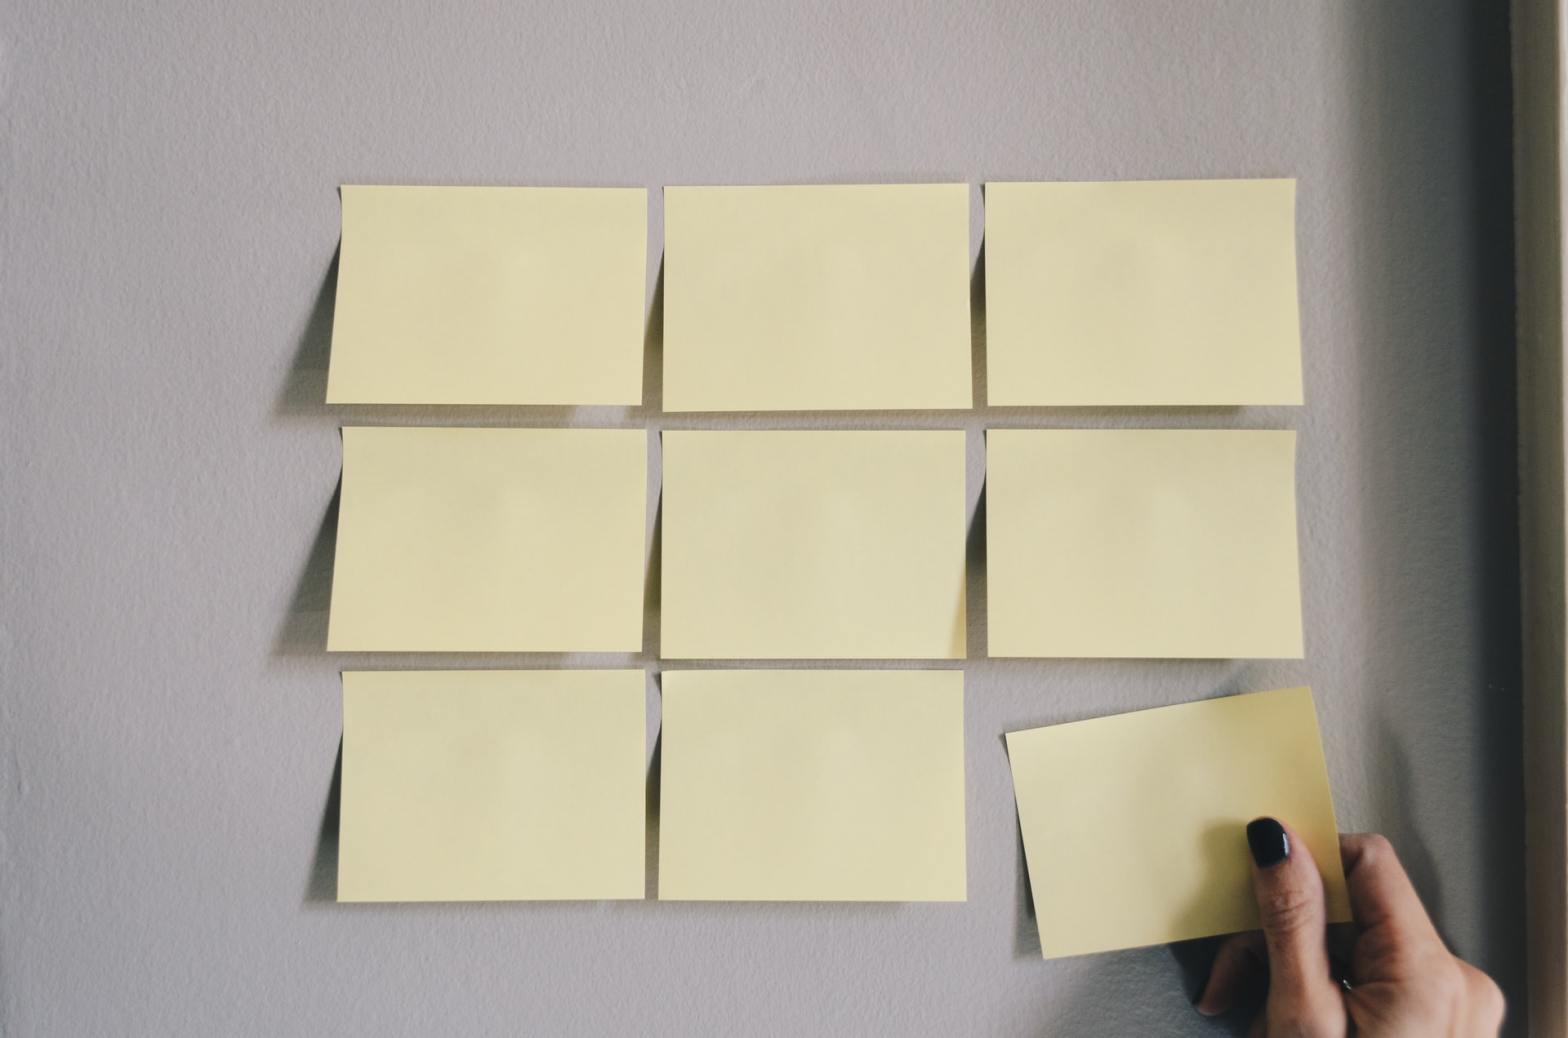 A hand placing post-it notes in a 3x3 arrangement. Photo by Kelly Sikkema on Unsplash